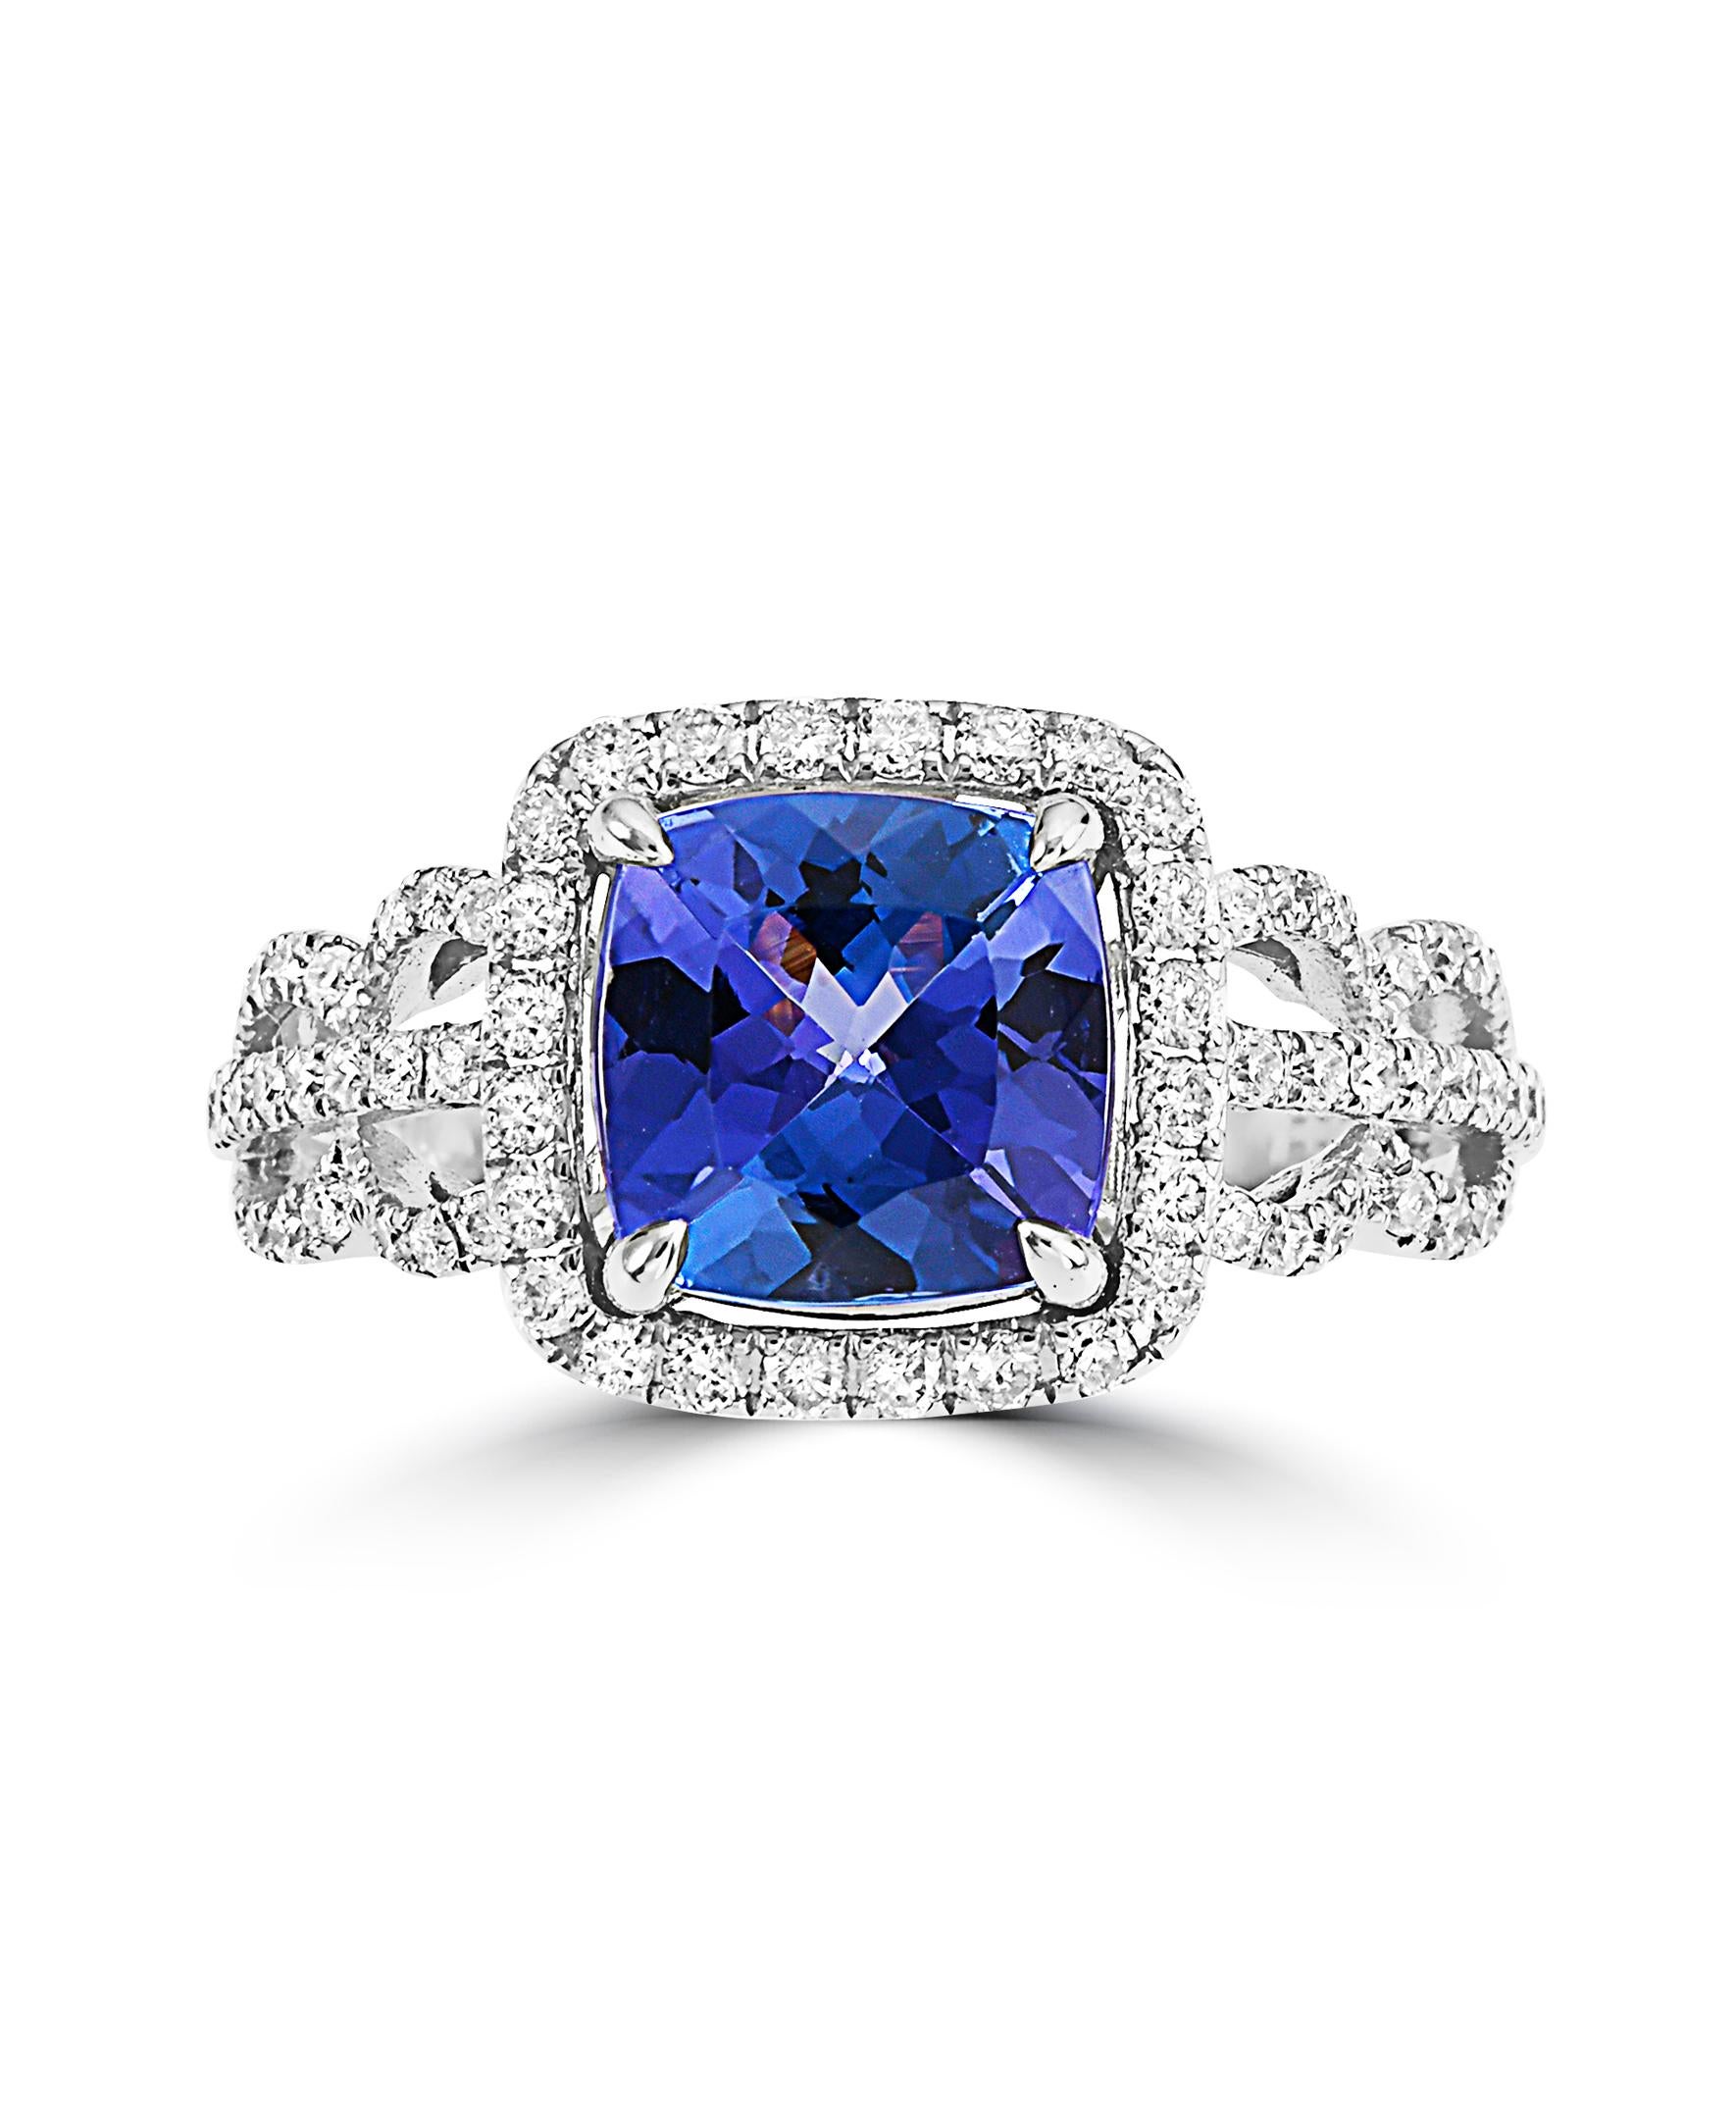 This Effy design ring is set in 14K white gold. The design is set off with a cushion cut Tanzanite, with a total weight of 2.28ct.
The diamond accent stones are round in shape and the total weight is 0.59ct.
This ring is a sizable 7. 
The item